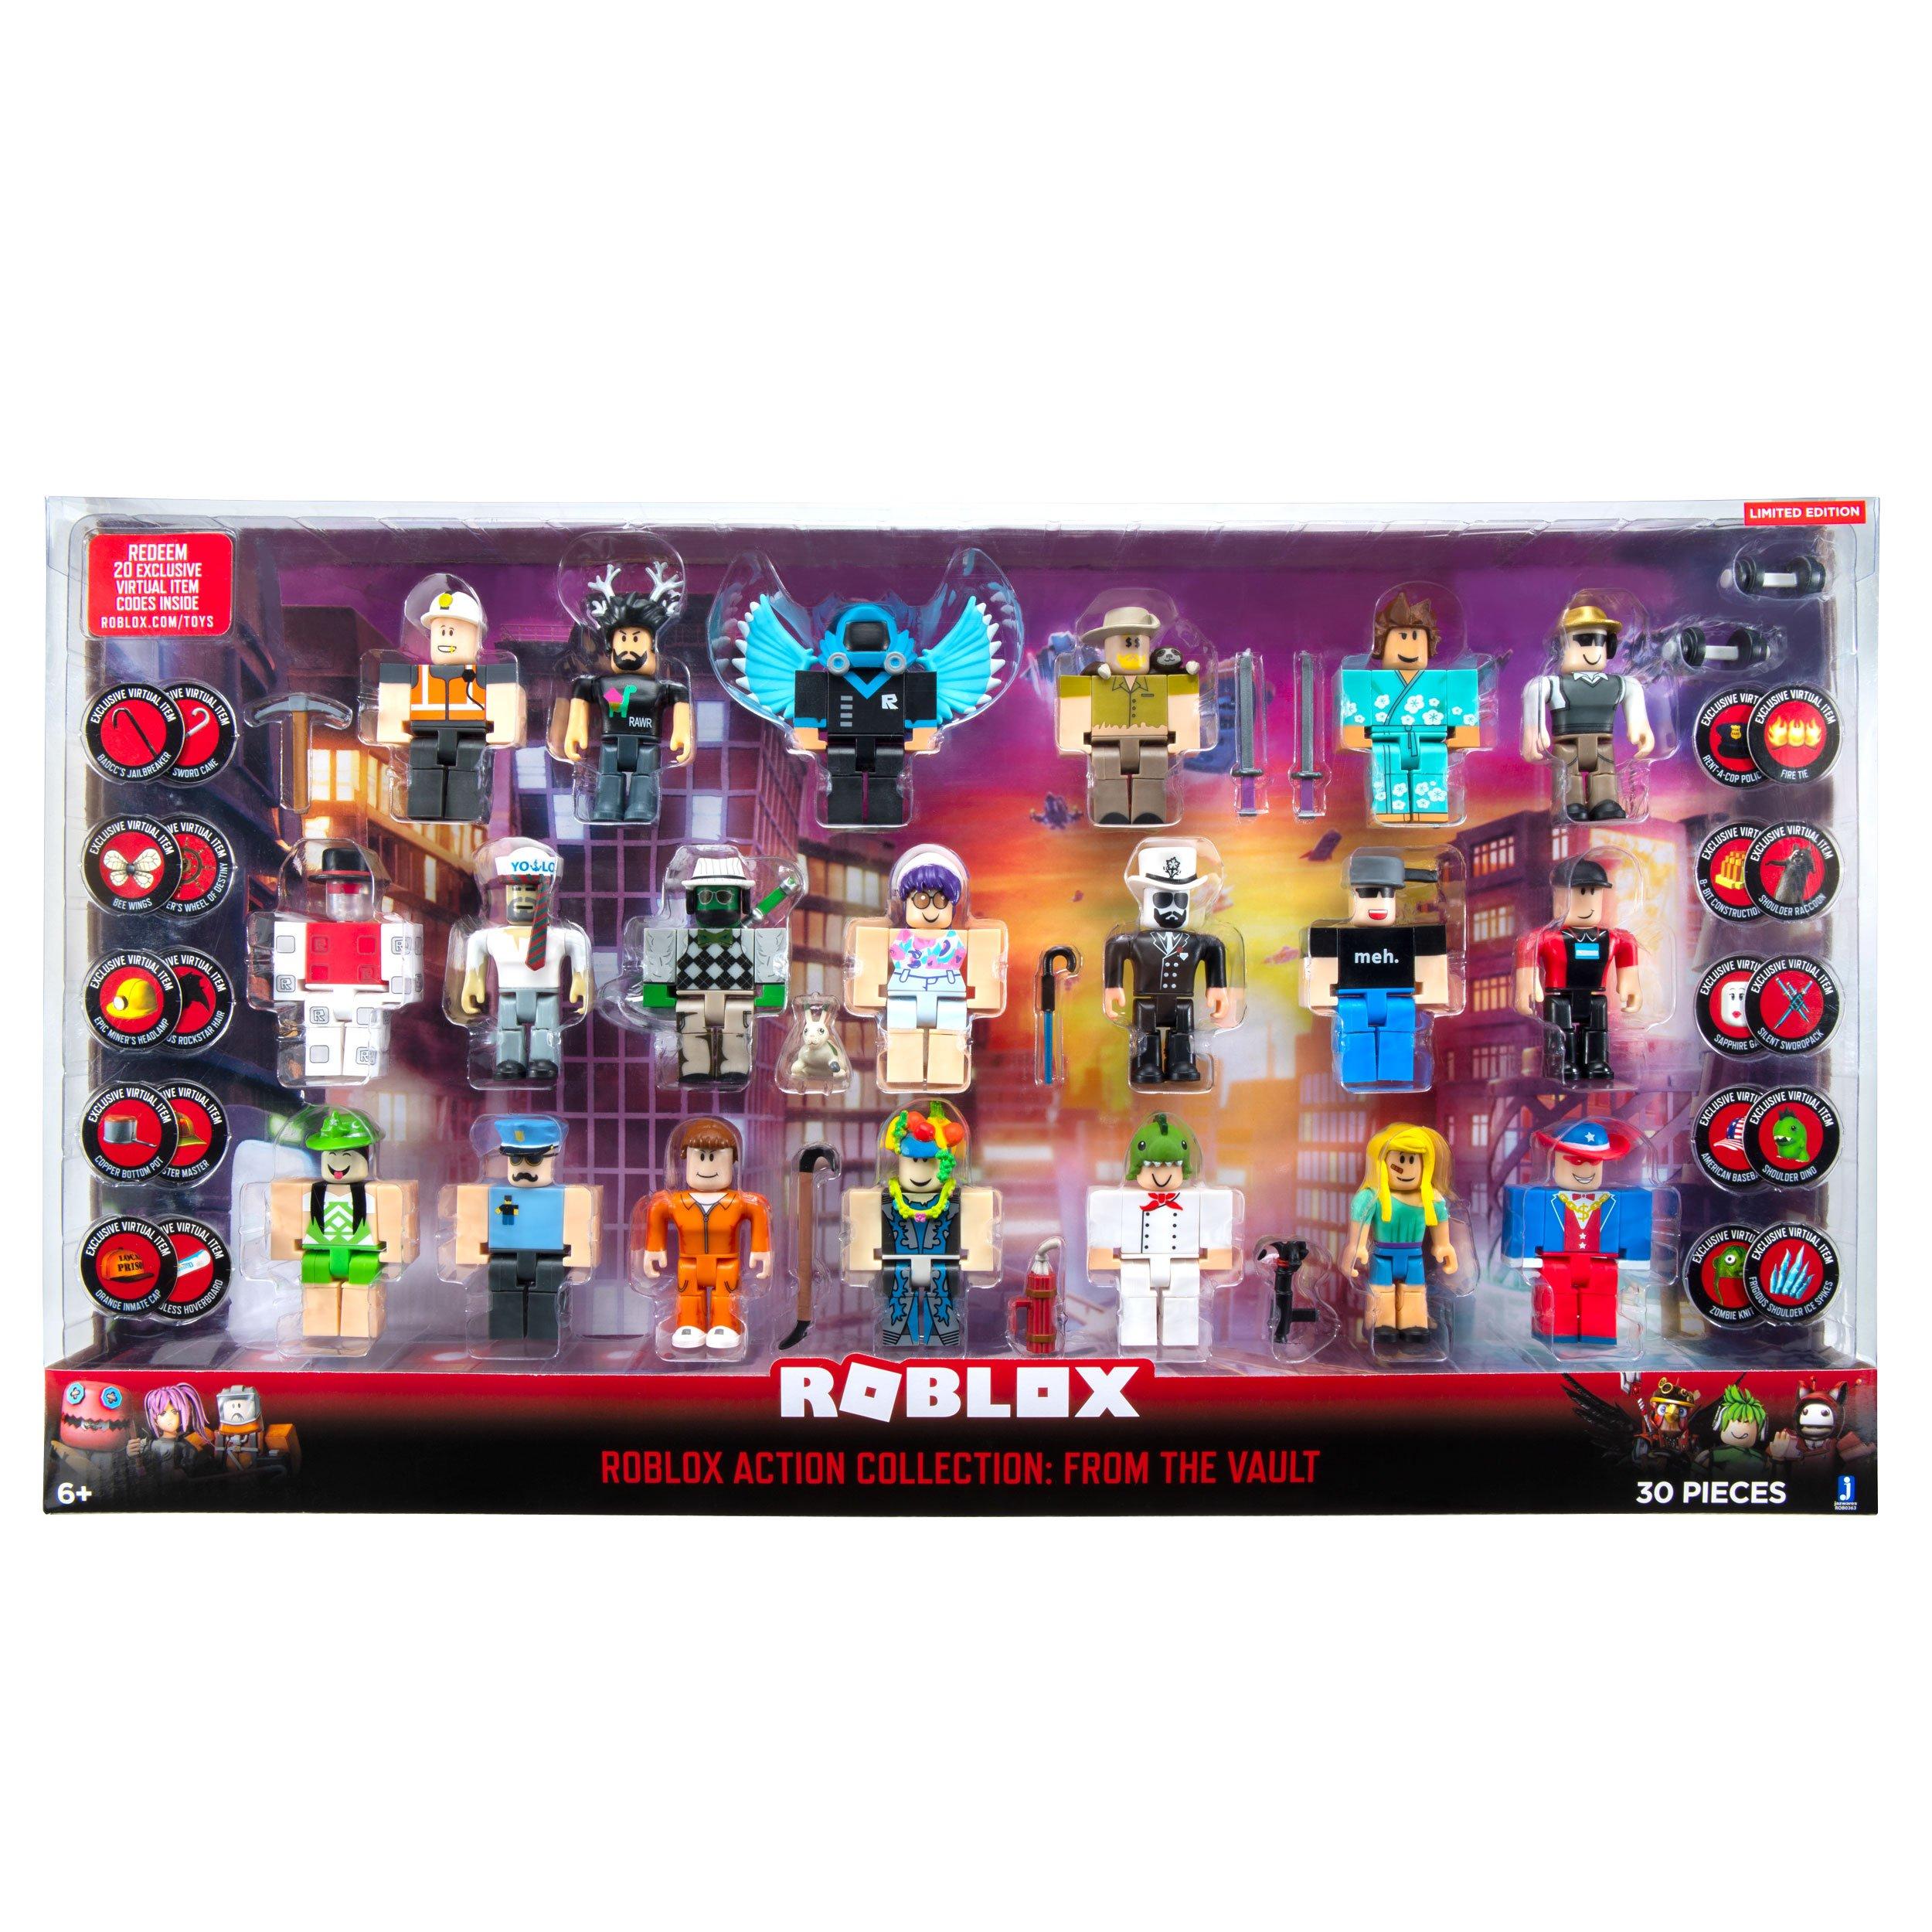 Roblox Action Collection From The Vault 20 Pack Includes Exclusive Virtual Item Gamestop - roblox xbox gamestop